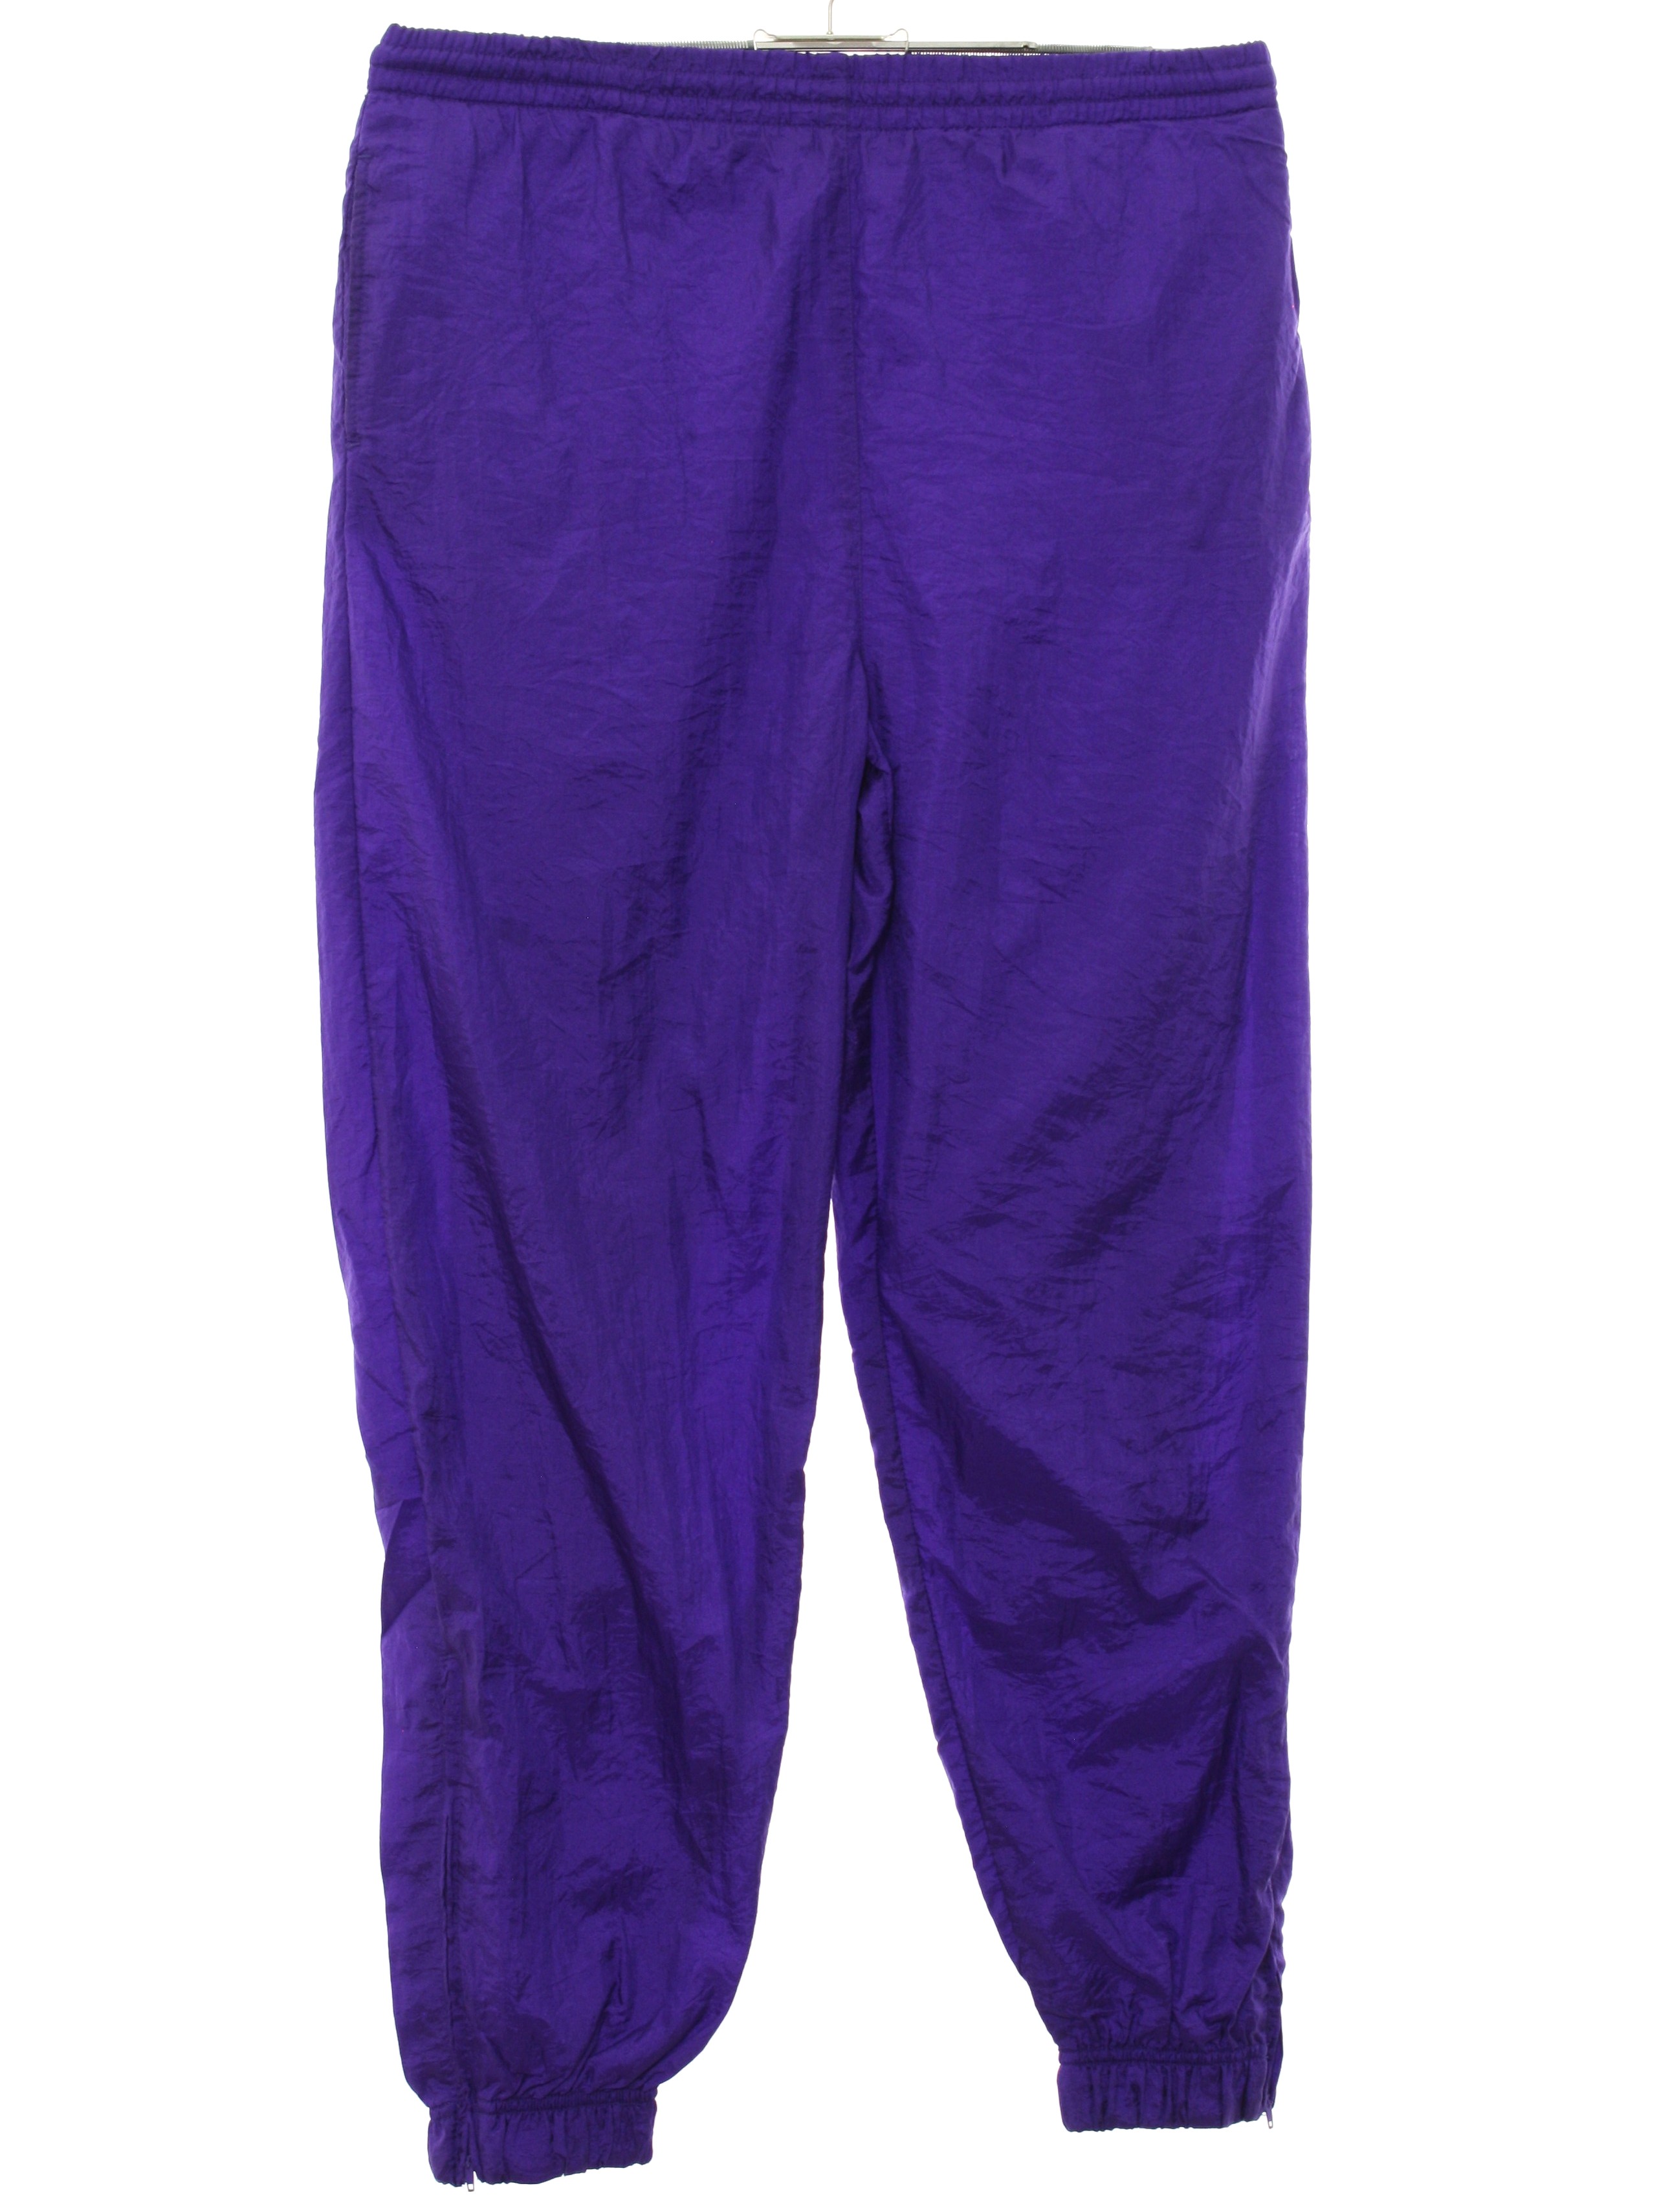 Pants: (made in 90s) -Care Label Only- Unisex dark purple solid colored ...